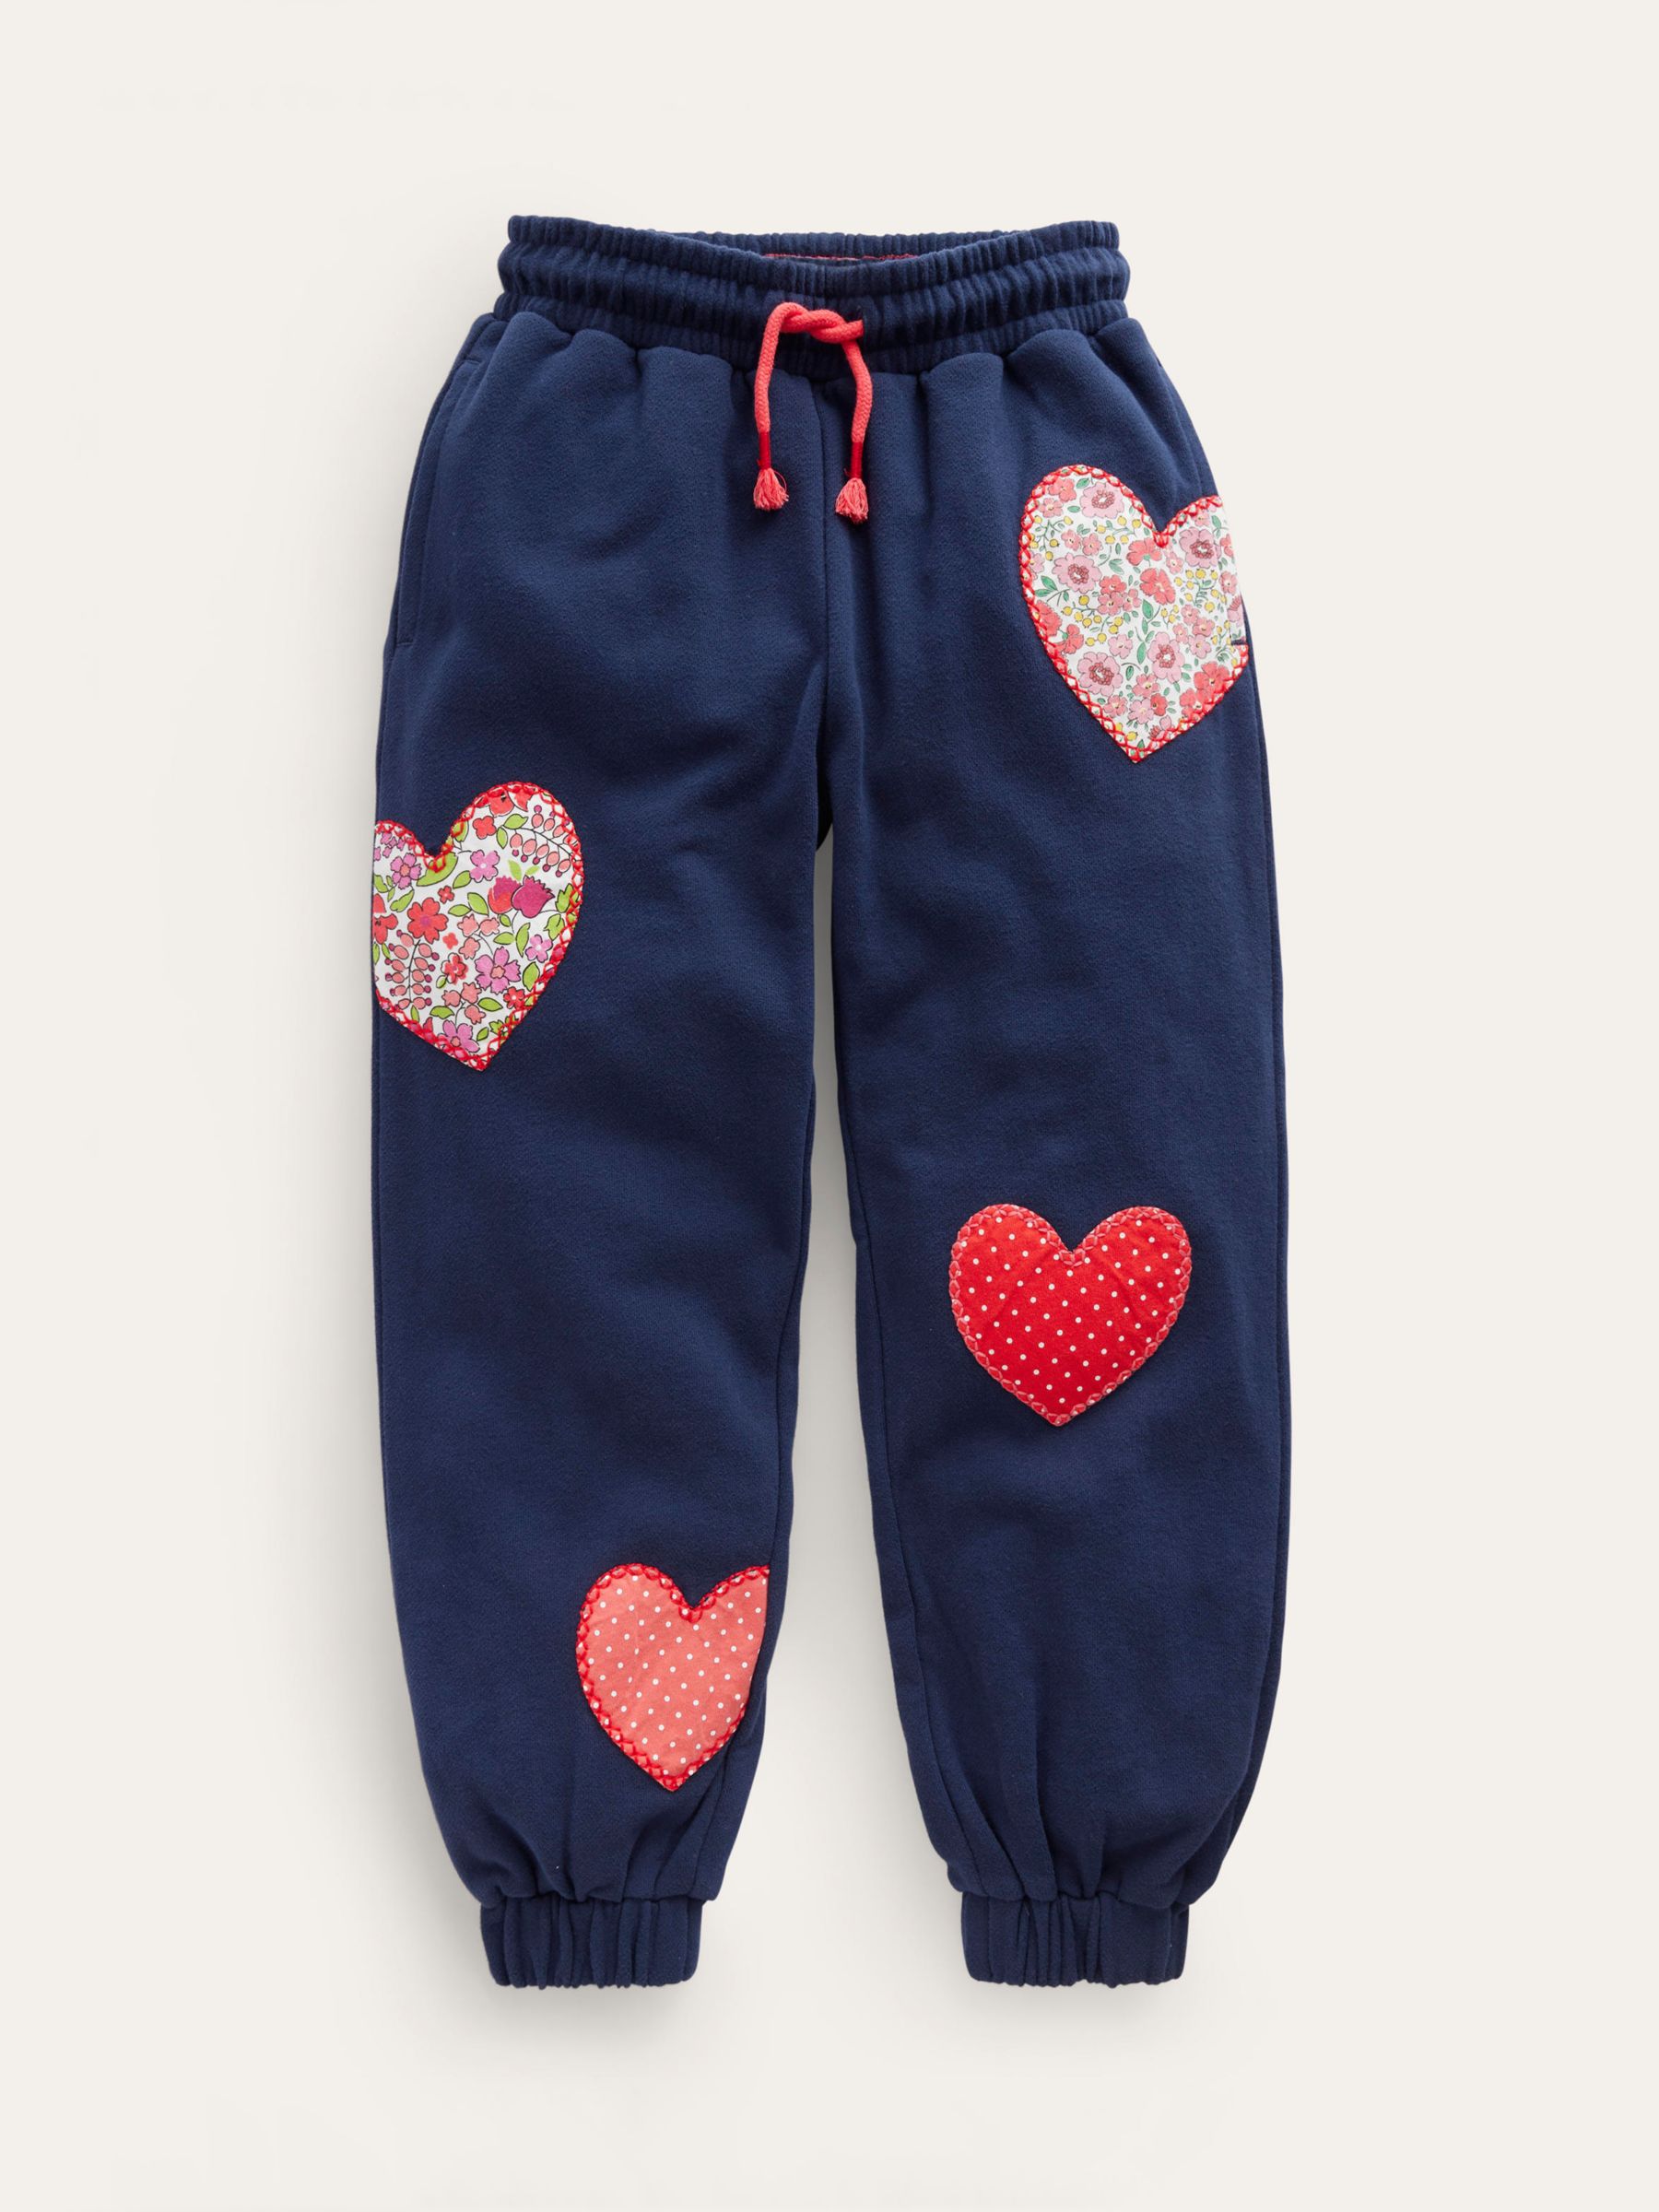 Mini Boden Kids' Heart Knickers, Pack of 7, Multi at John Lewis & Partners